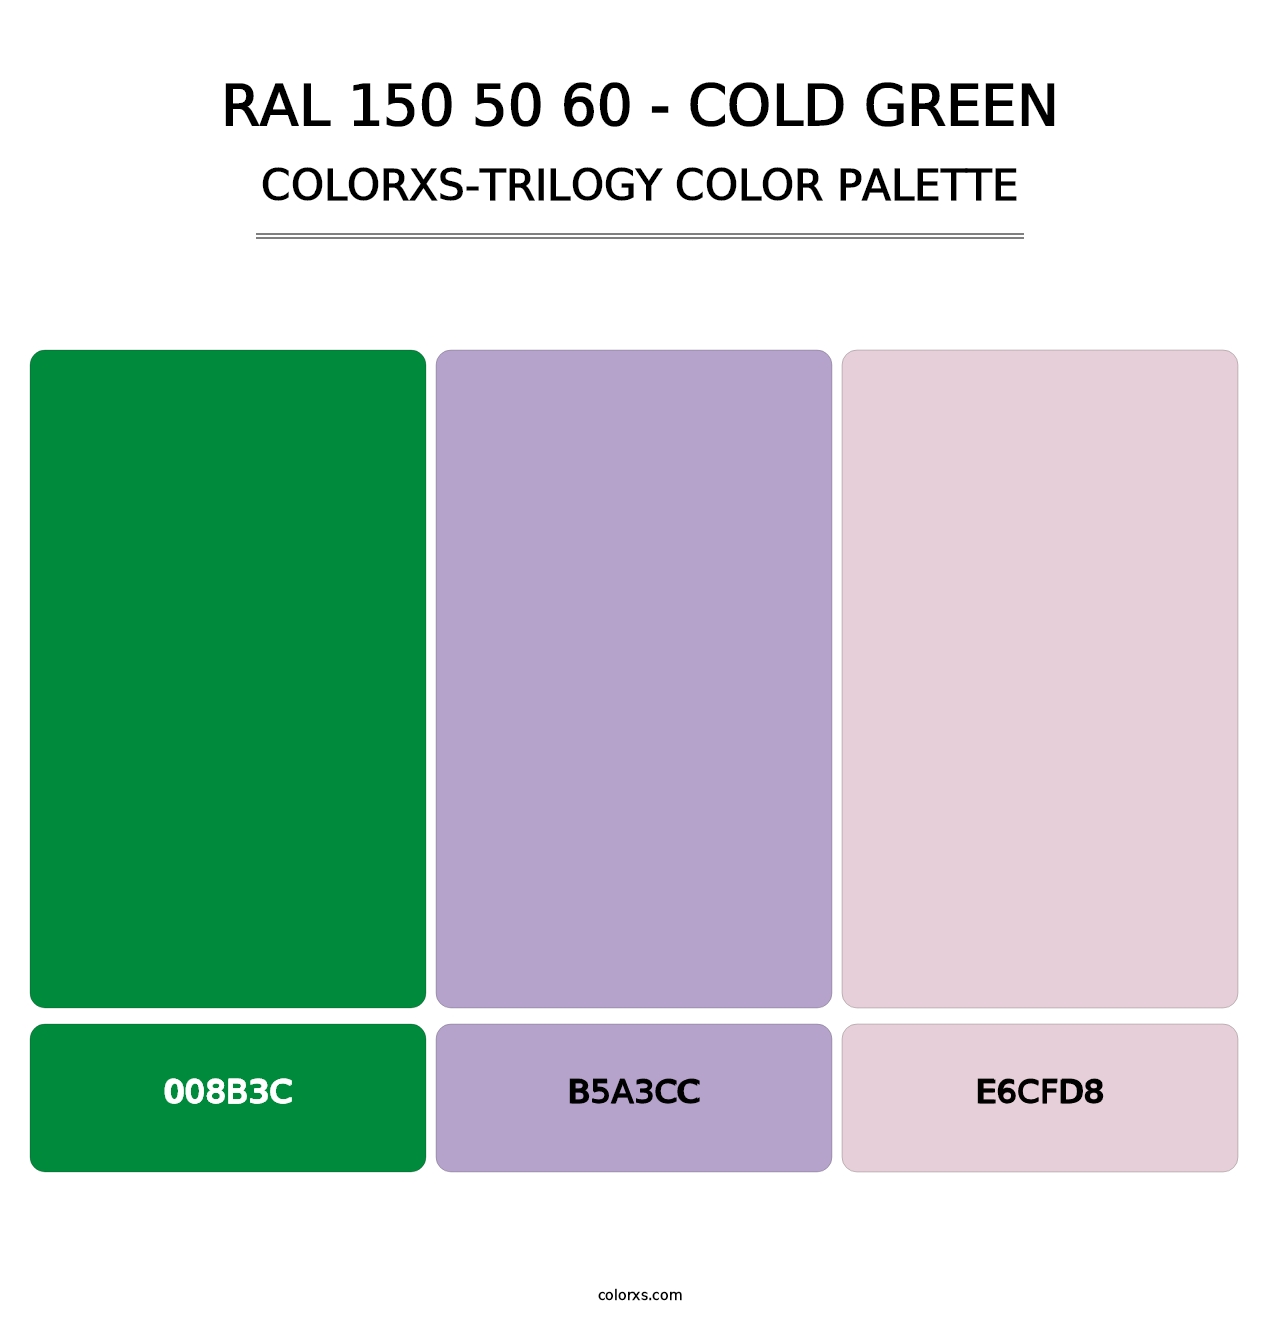 RAL 150 50 60 - Cold Green - Colorxs Trilogy Palette